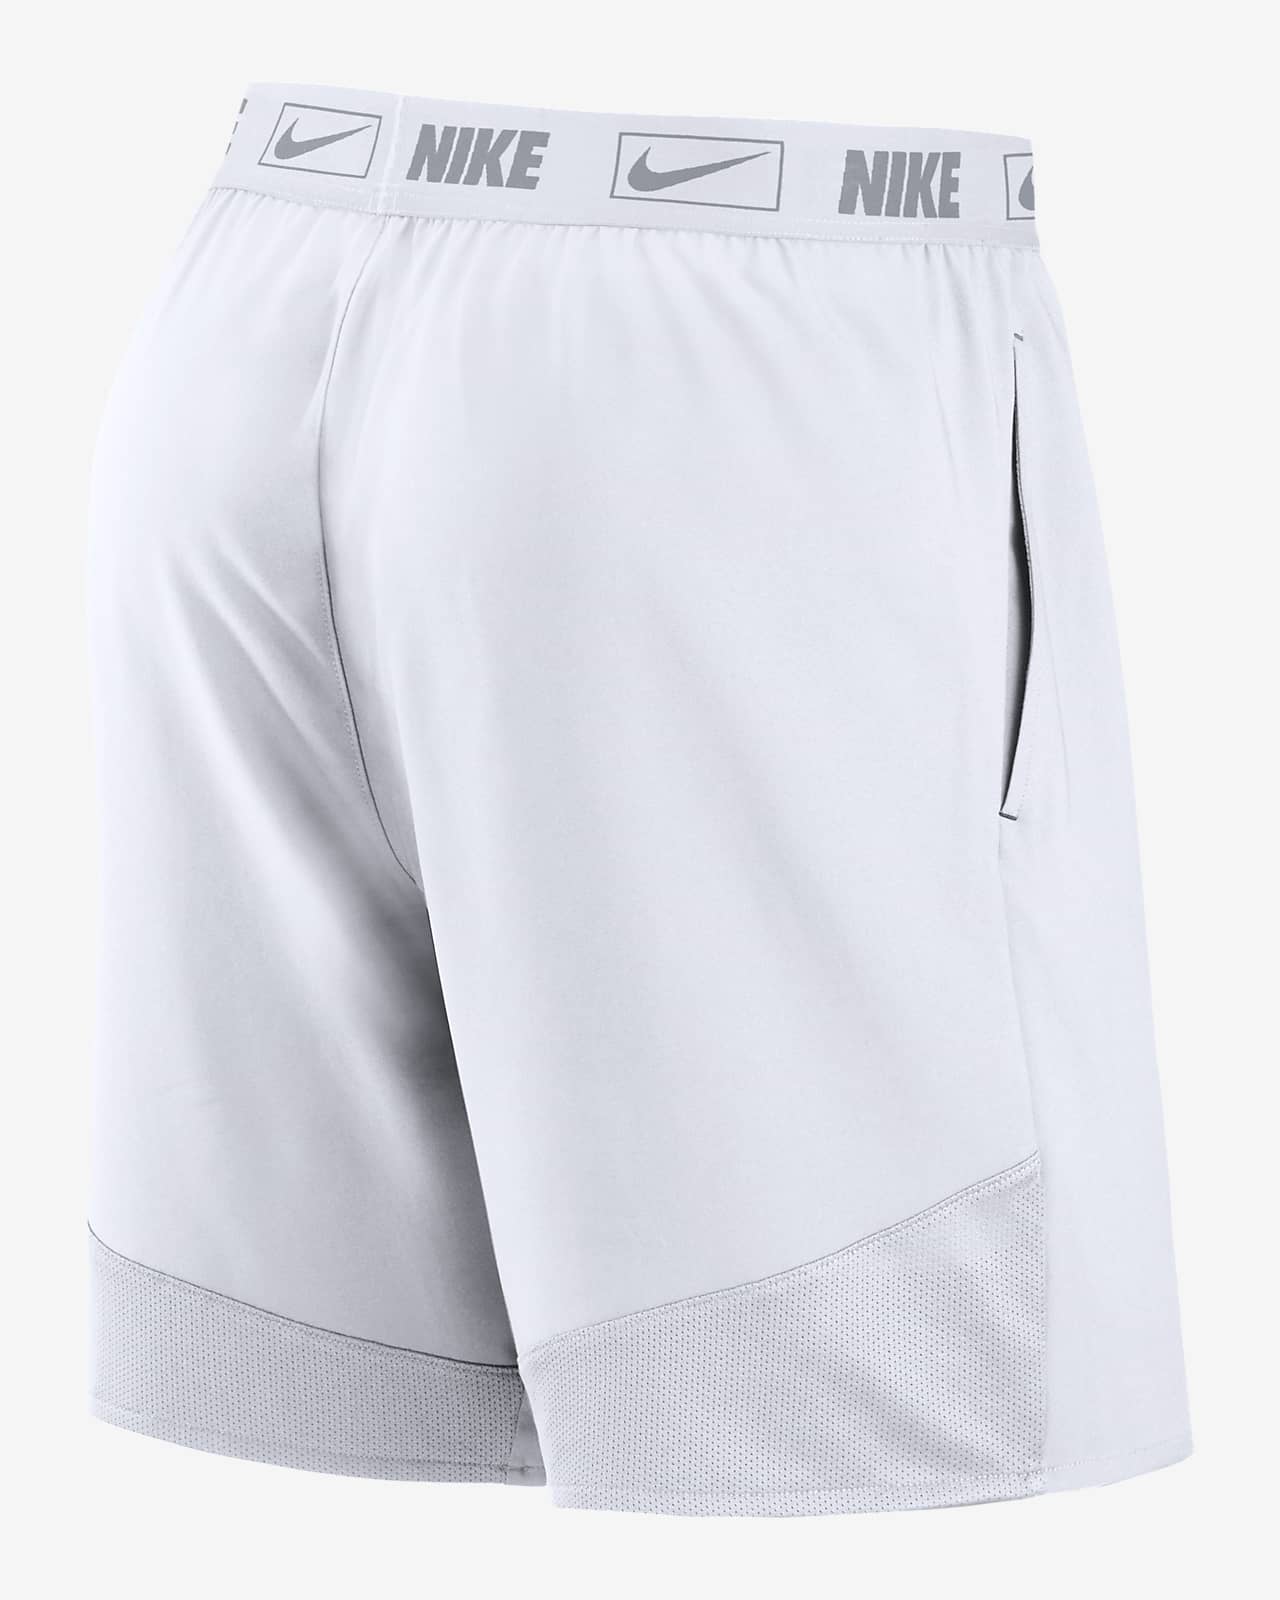 padres city connect shorts